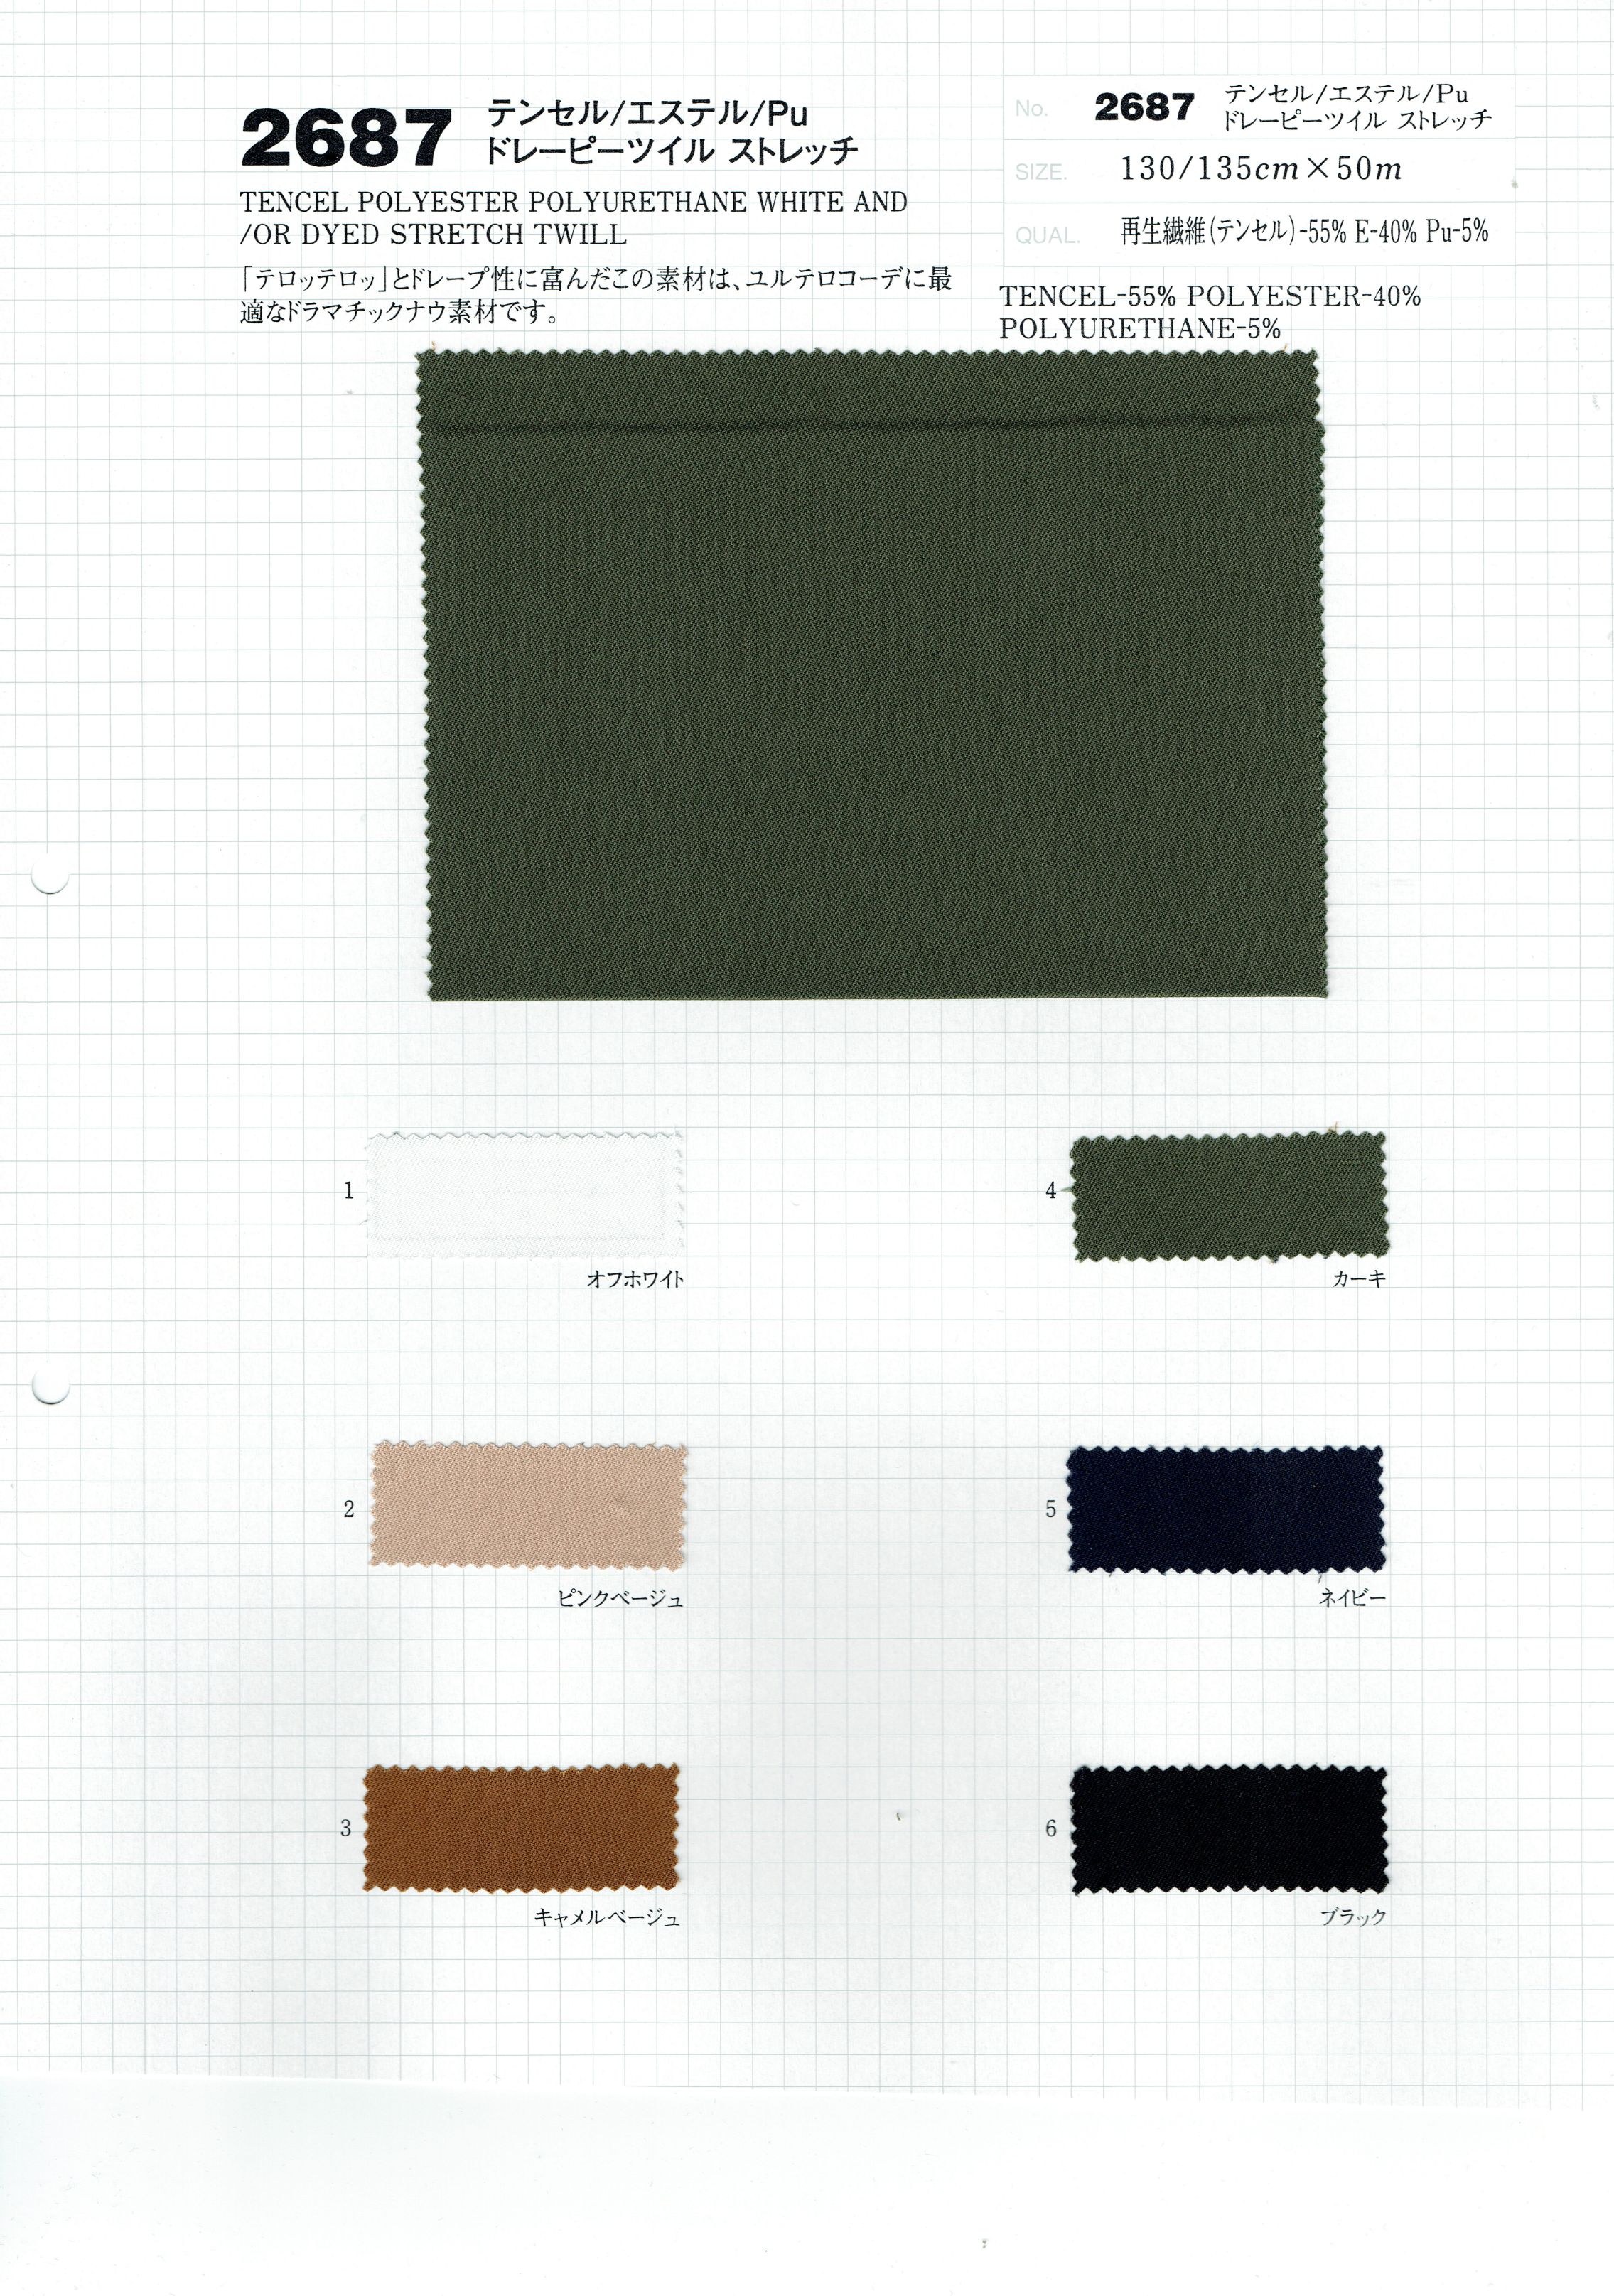 View 55% LYOCELL 40% POLYESTER 5% POLYURETHANE WHITE AND/OR DYED STRETCH TWILL